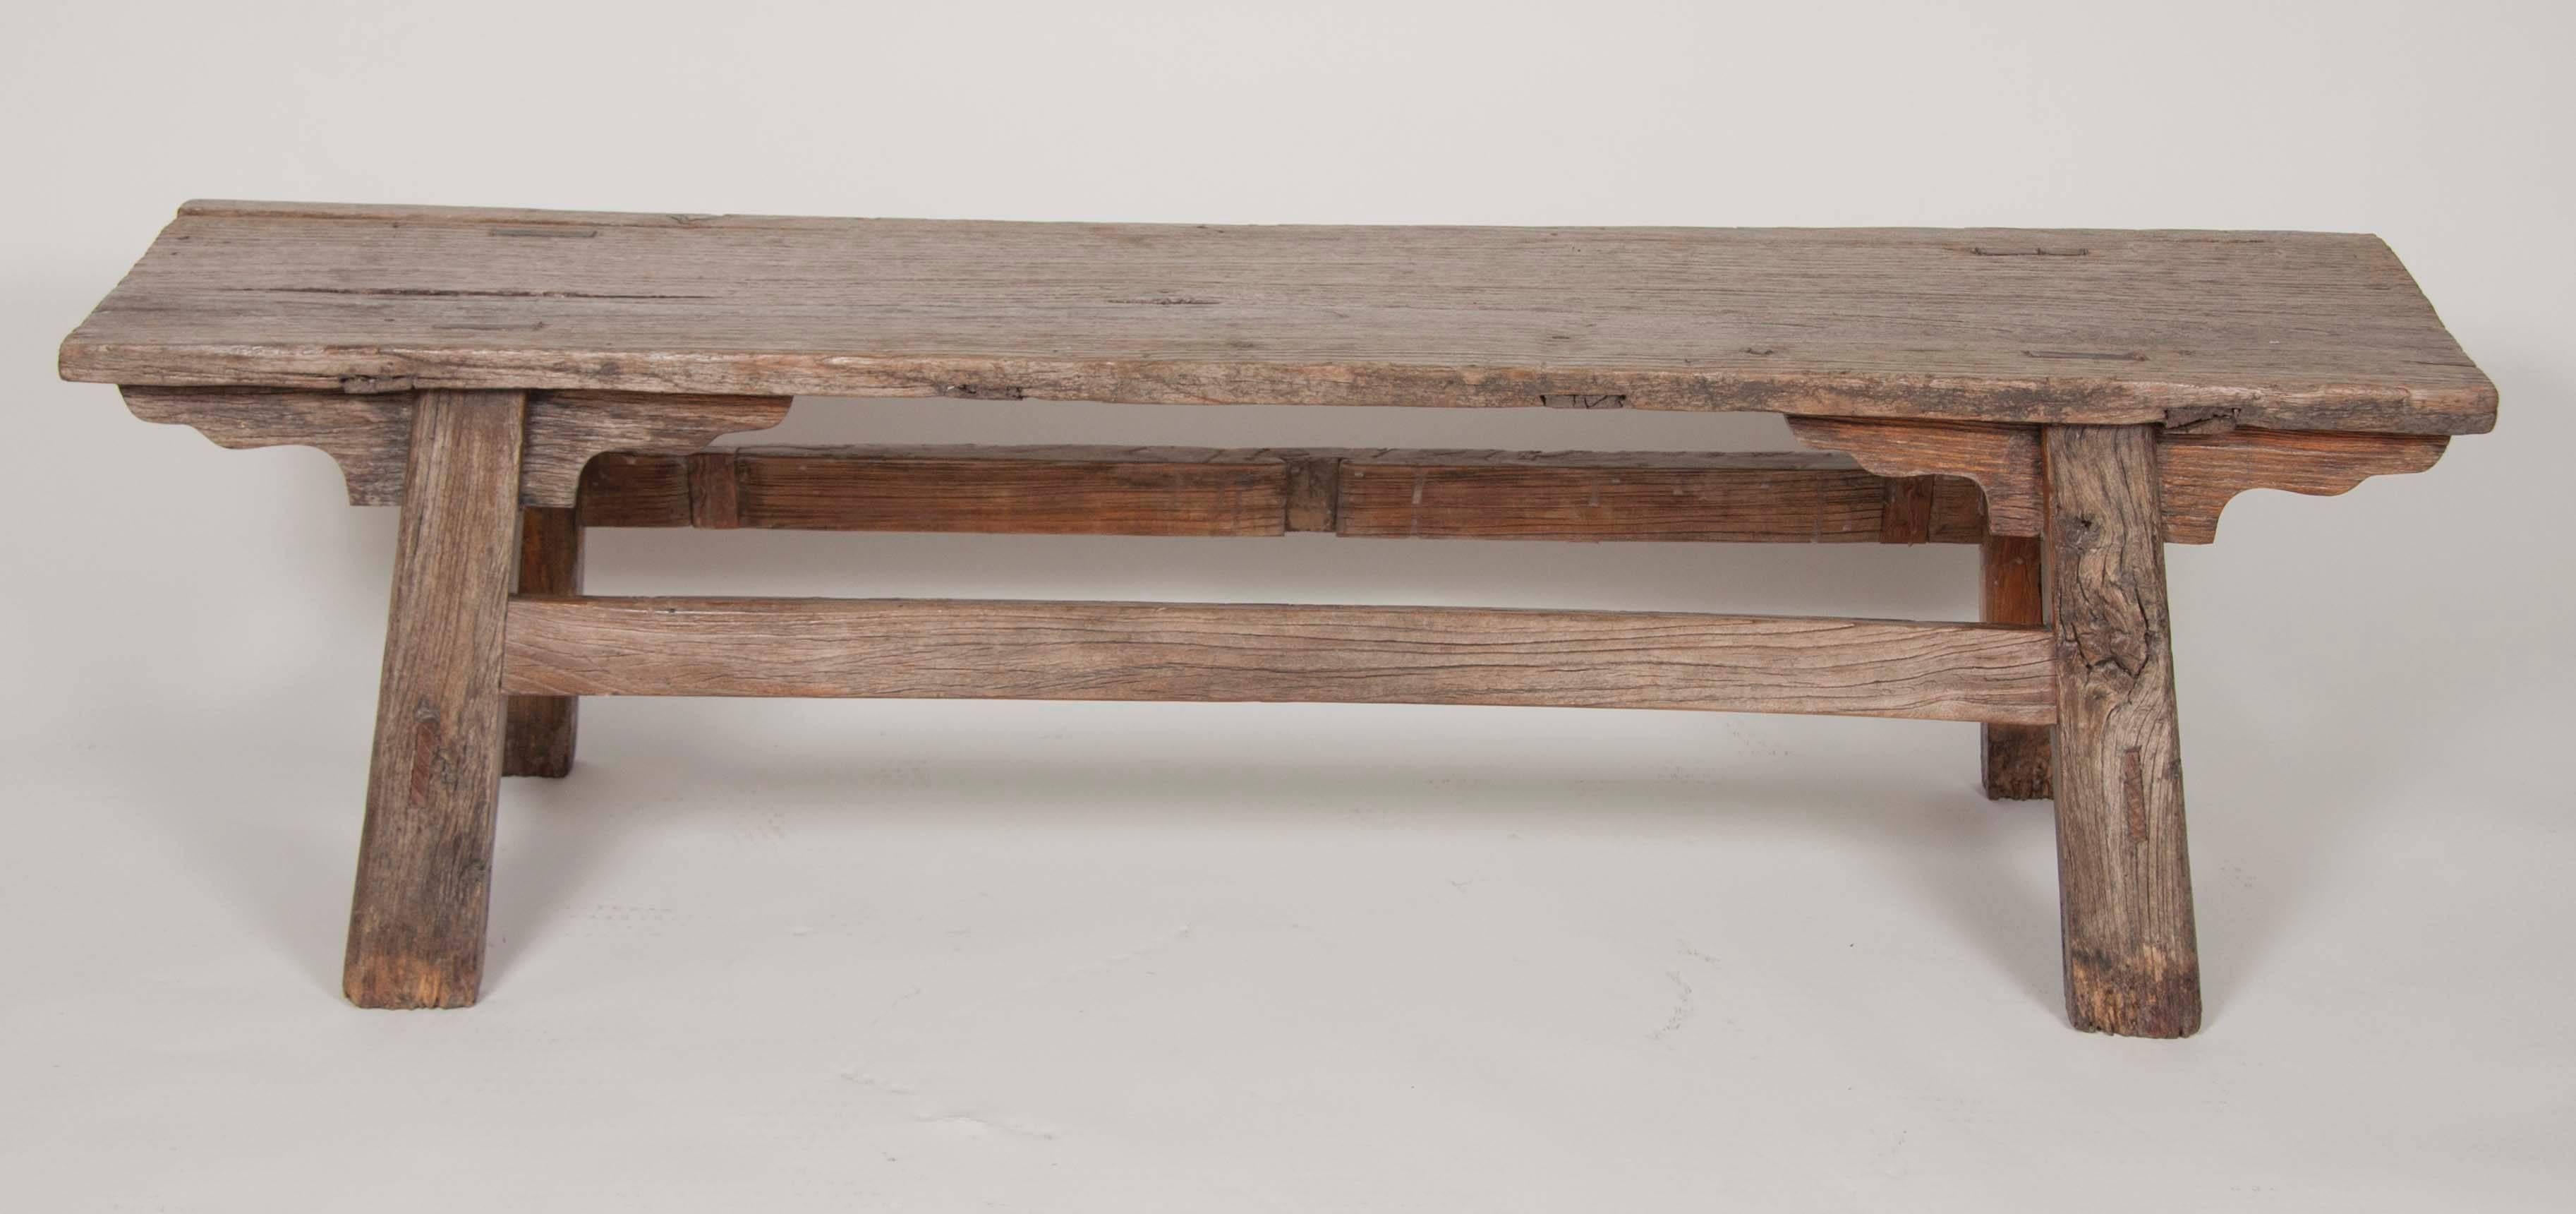 A pair of French, rustic and weathered hardwood benches. May be sold separately.